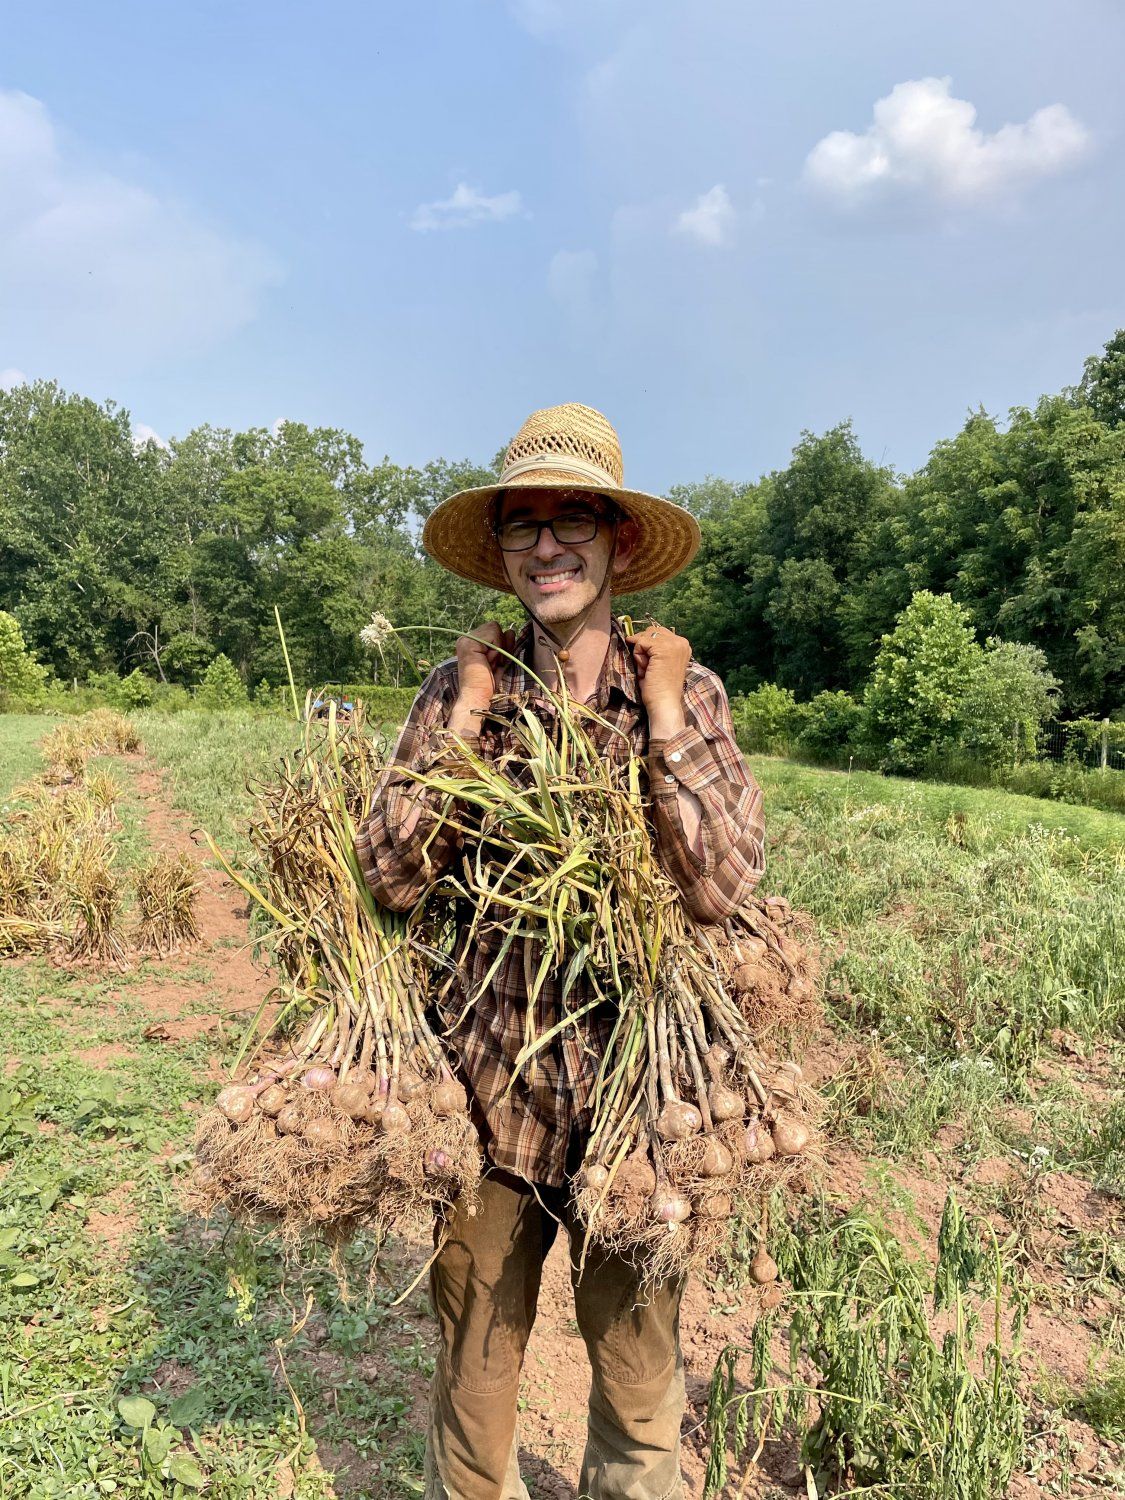 Previous Happening: 2021 Garlic Harvest is Complete!